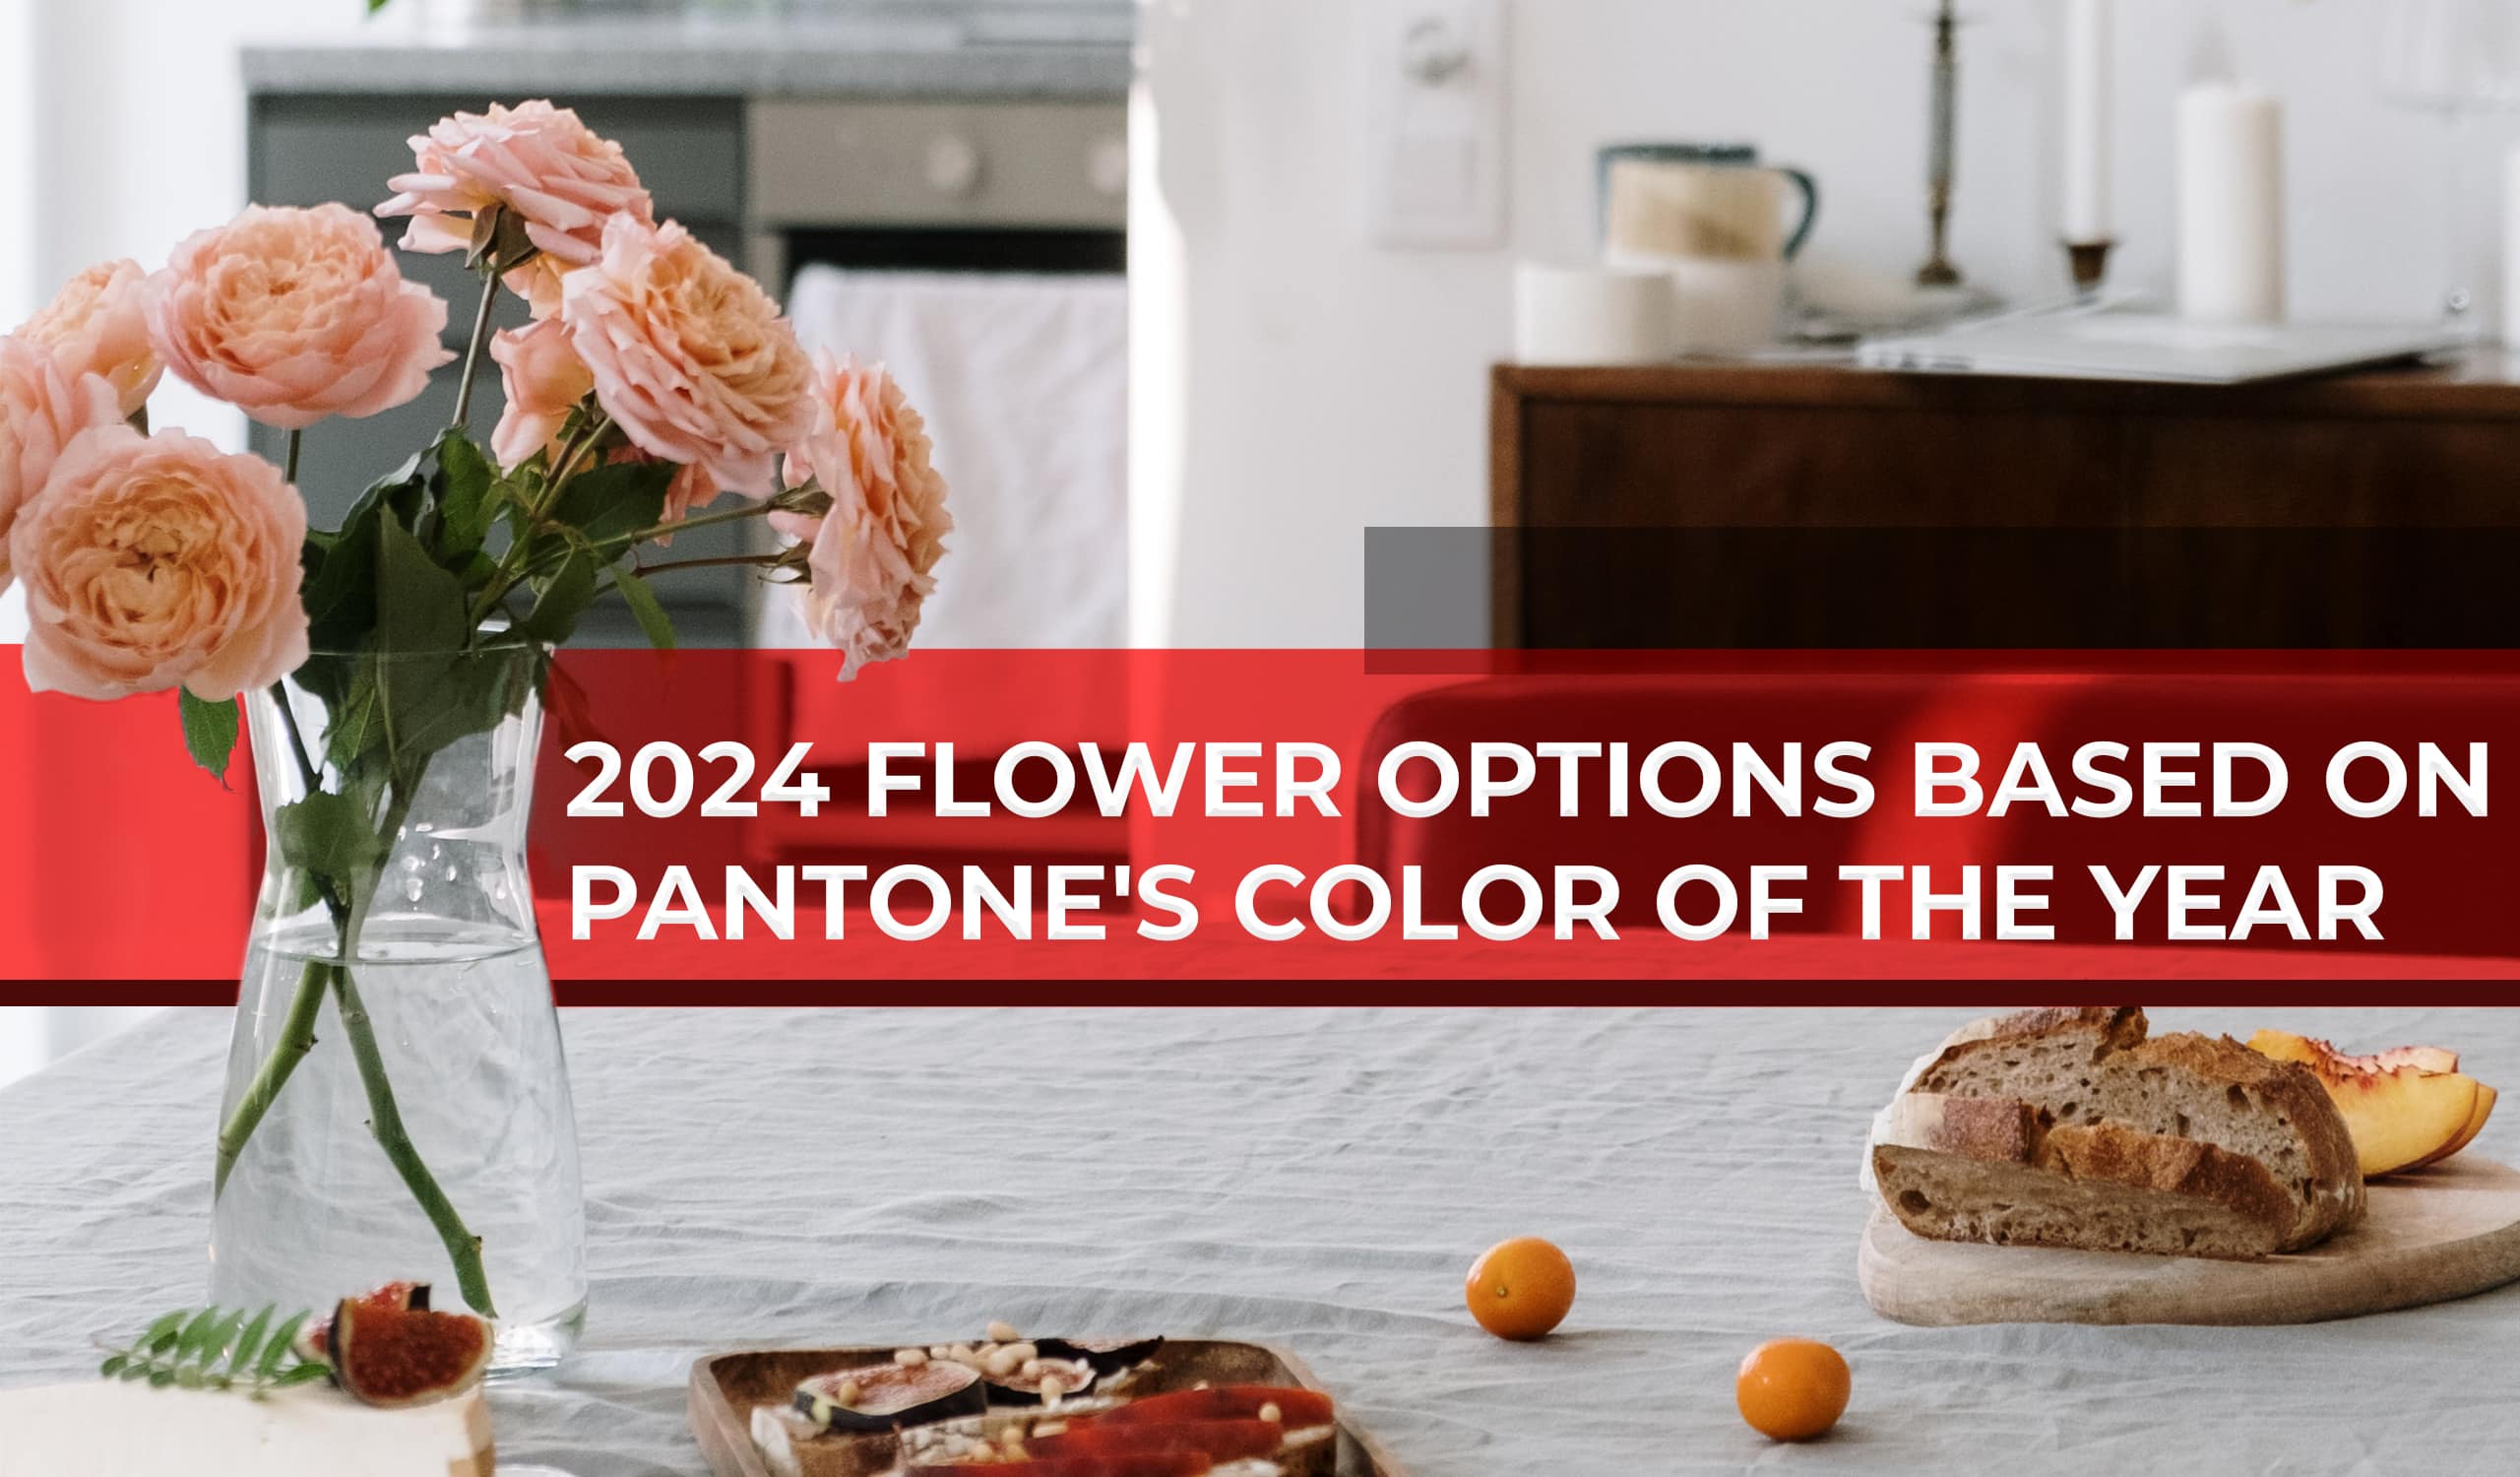 2024 Flower Options Based on Pantone’s Color of the Year